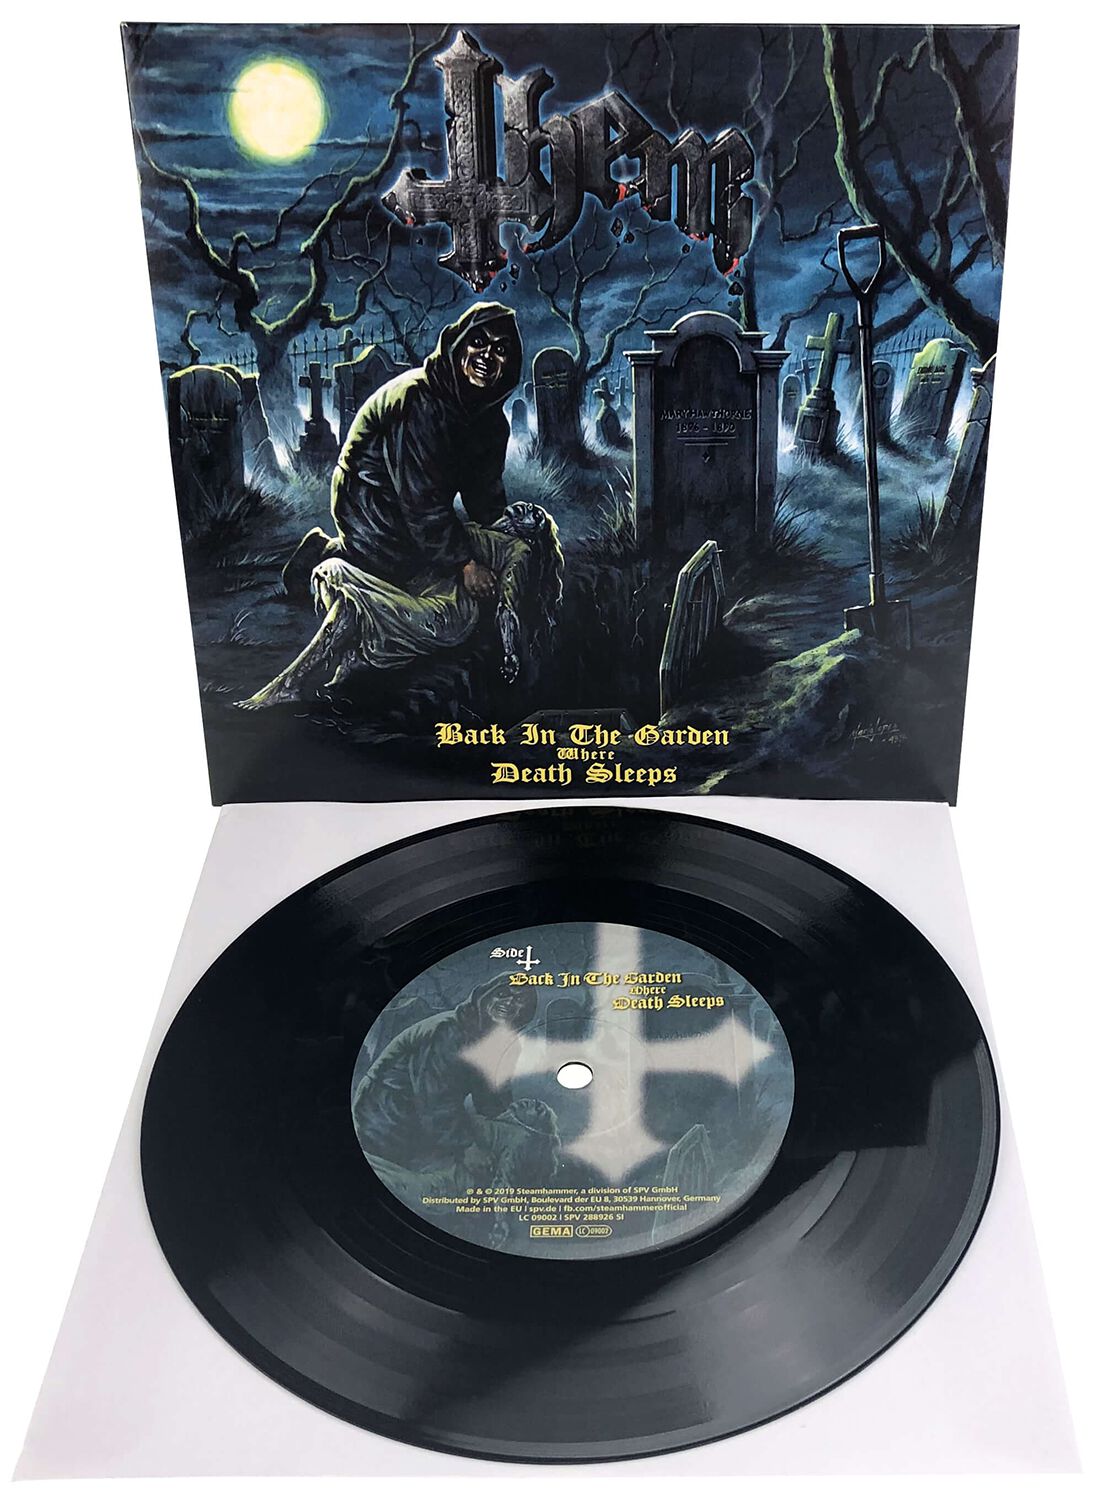 Image of Them Back in the garden where death sleeps 7 inch-SINGLE Standard